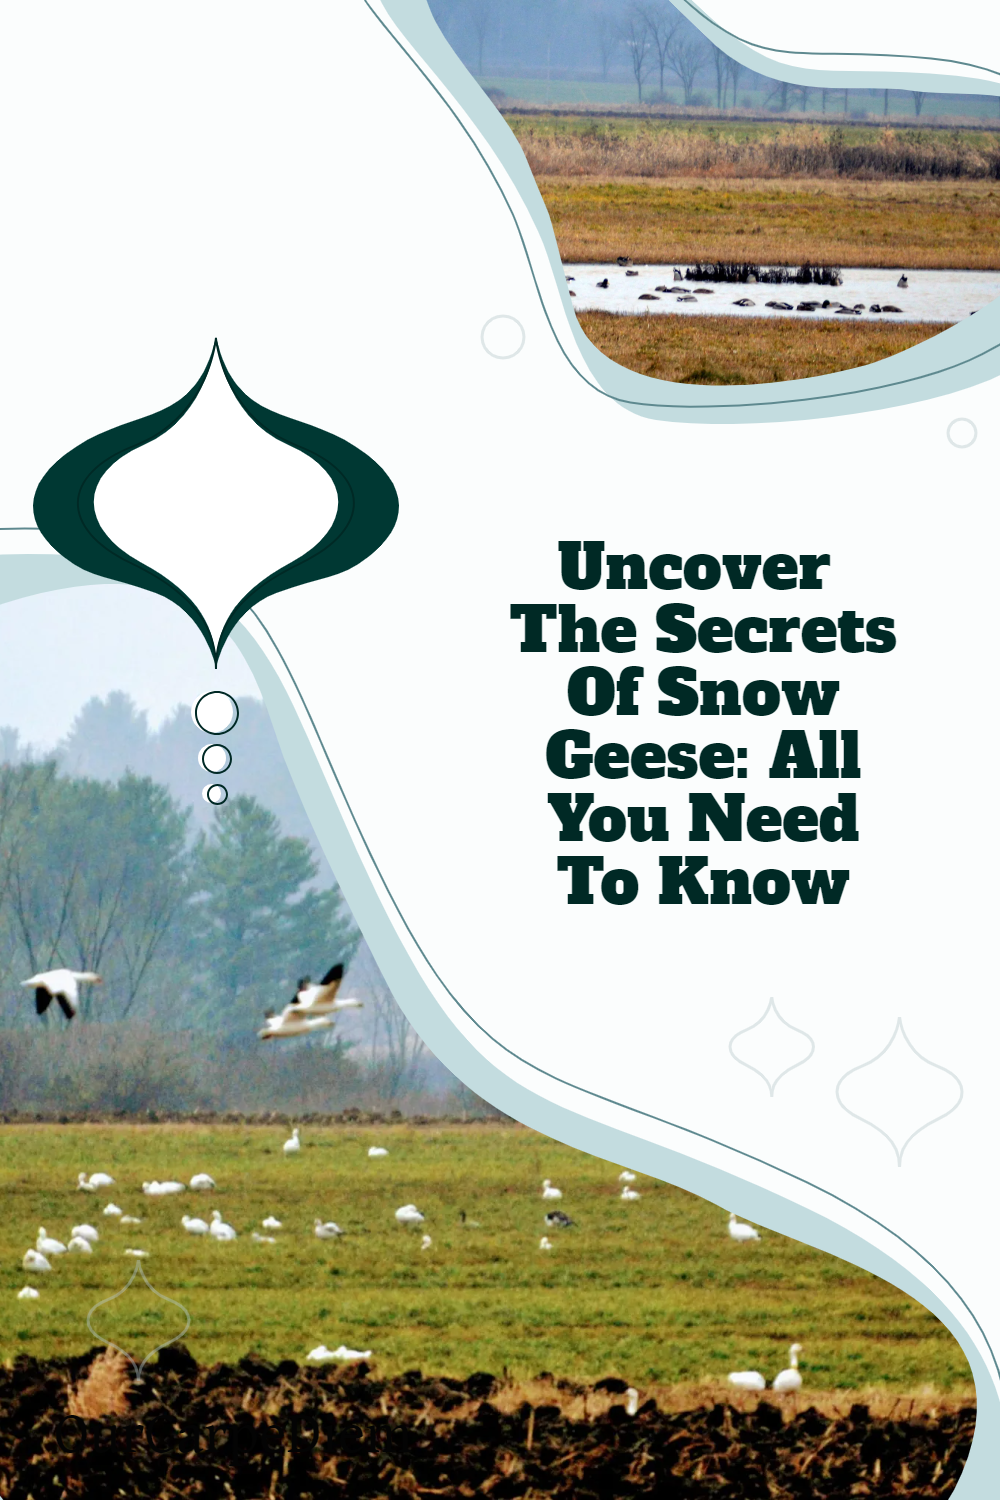 Uncover The Secrets Of Snow Geese: All You Need To Know